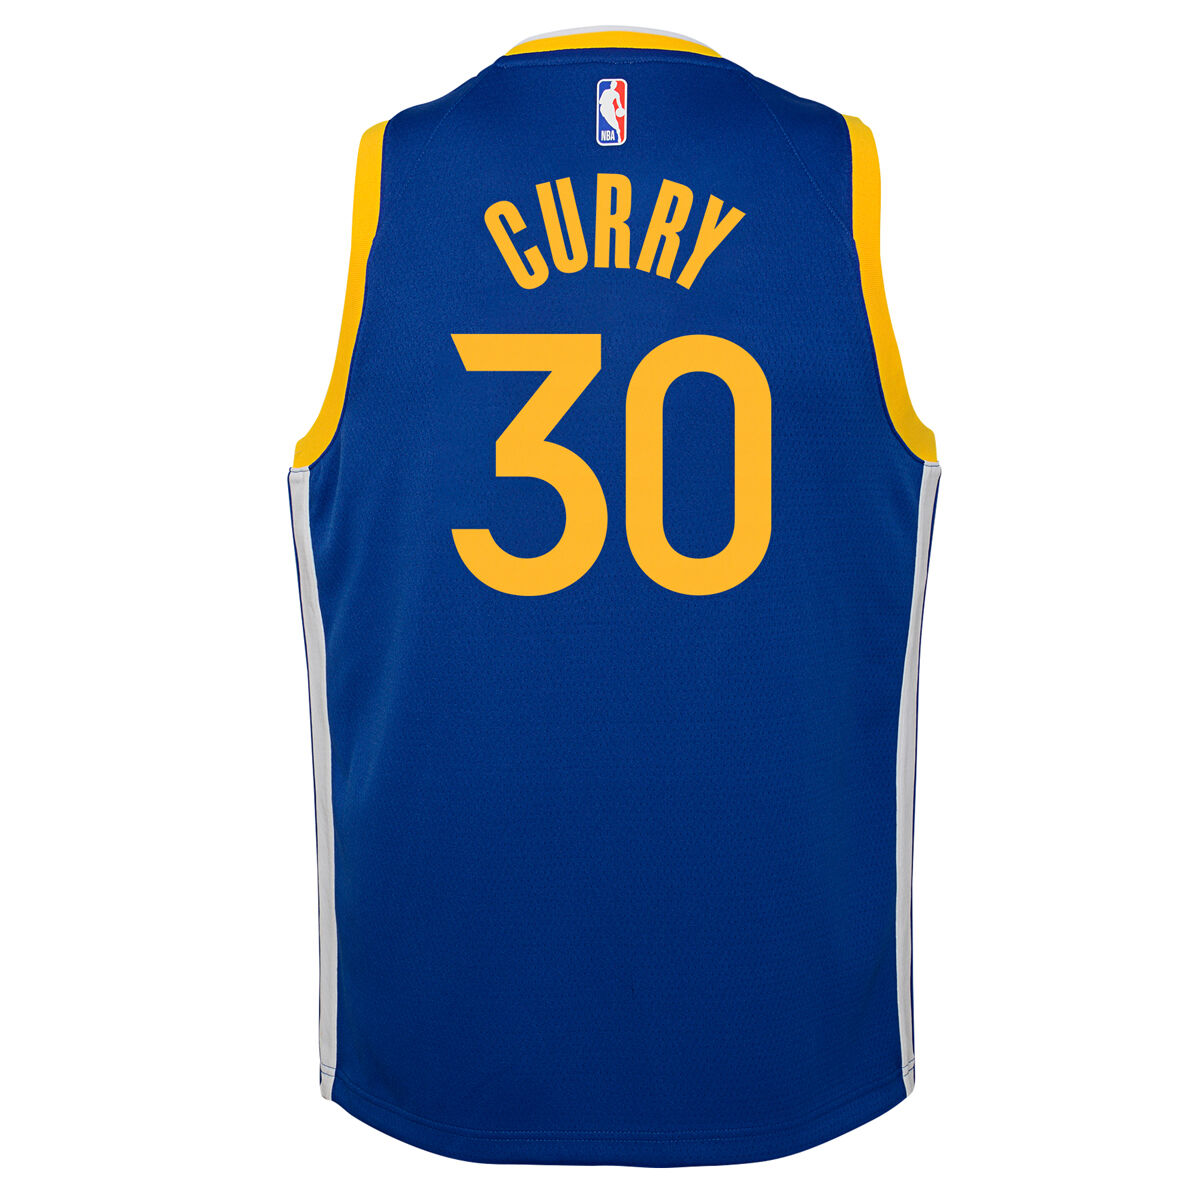 Youth XL (18/20) Nike Stephen Curry NBA GS Warriors Icon Edition